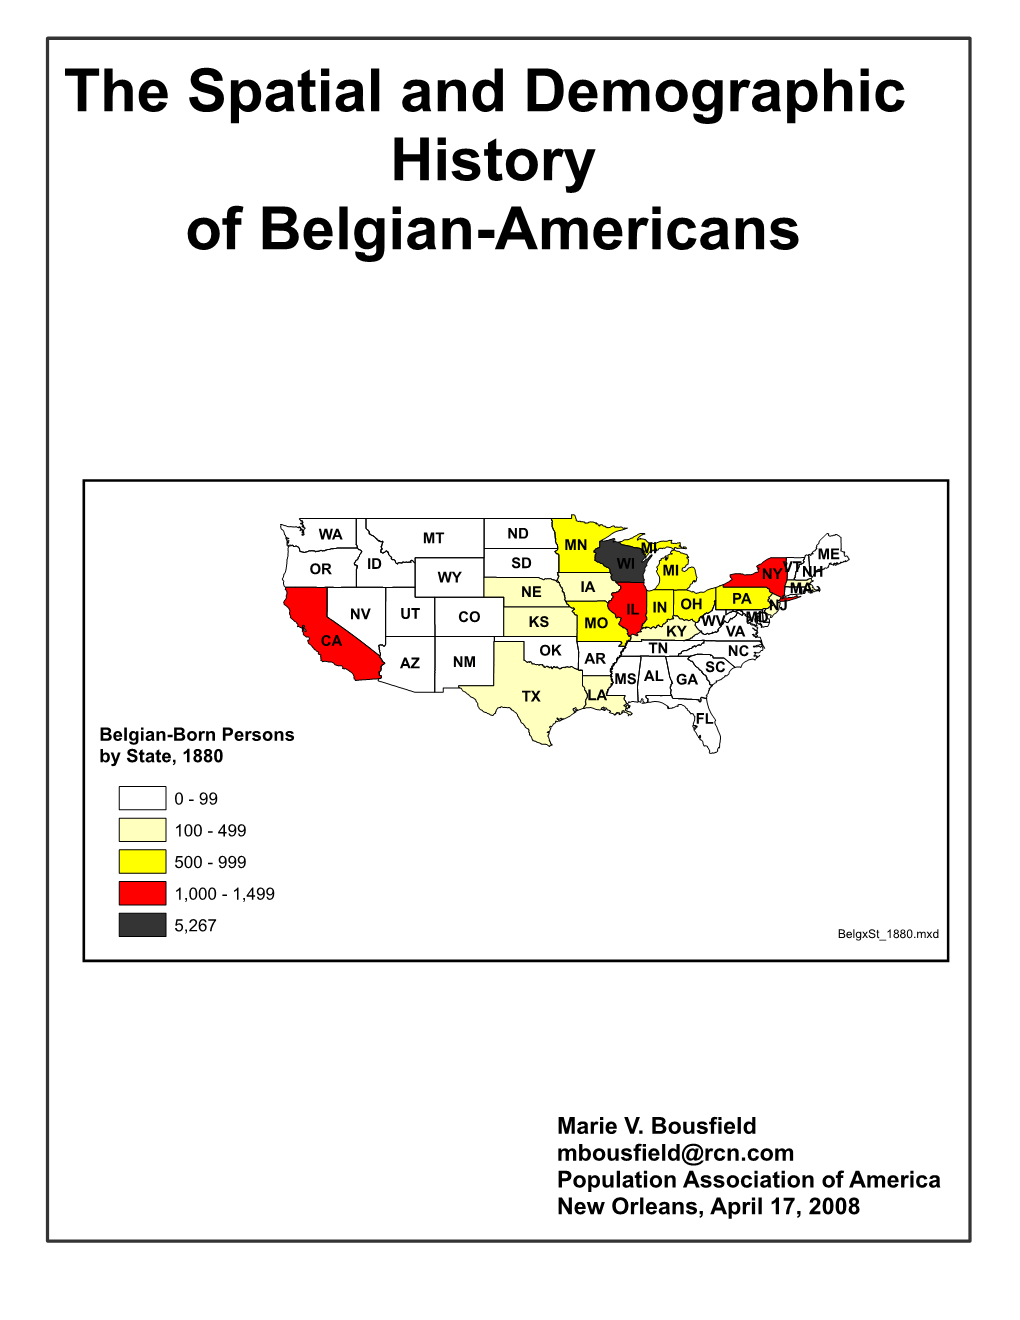 The Spatial and Demographic History of Belgian-Americans